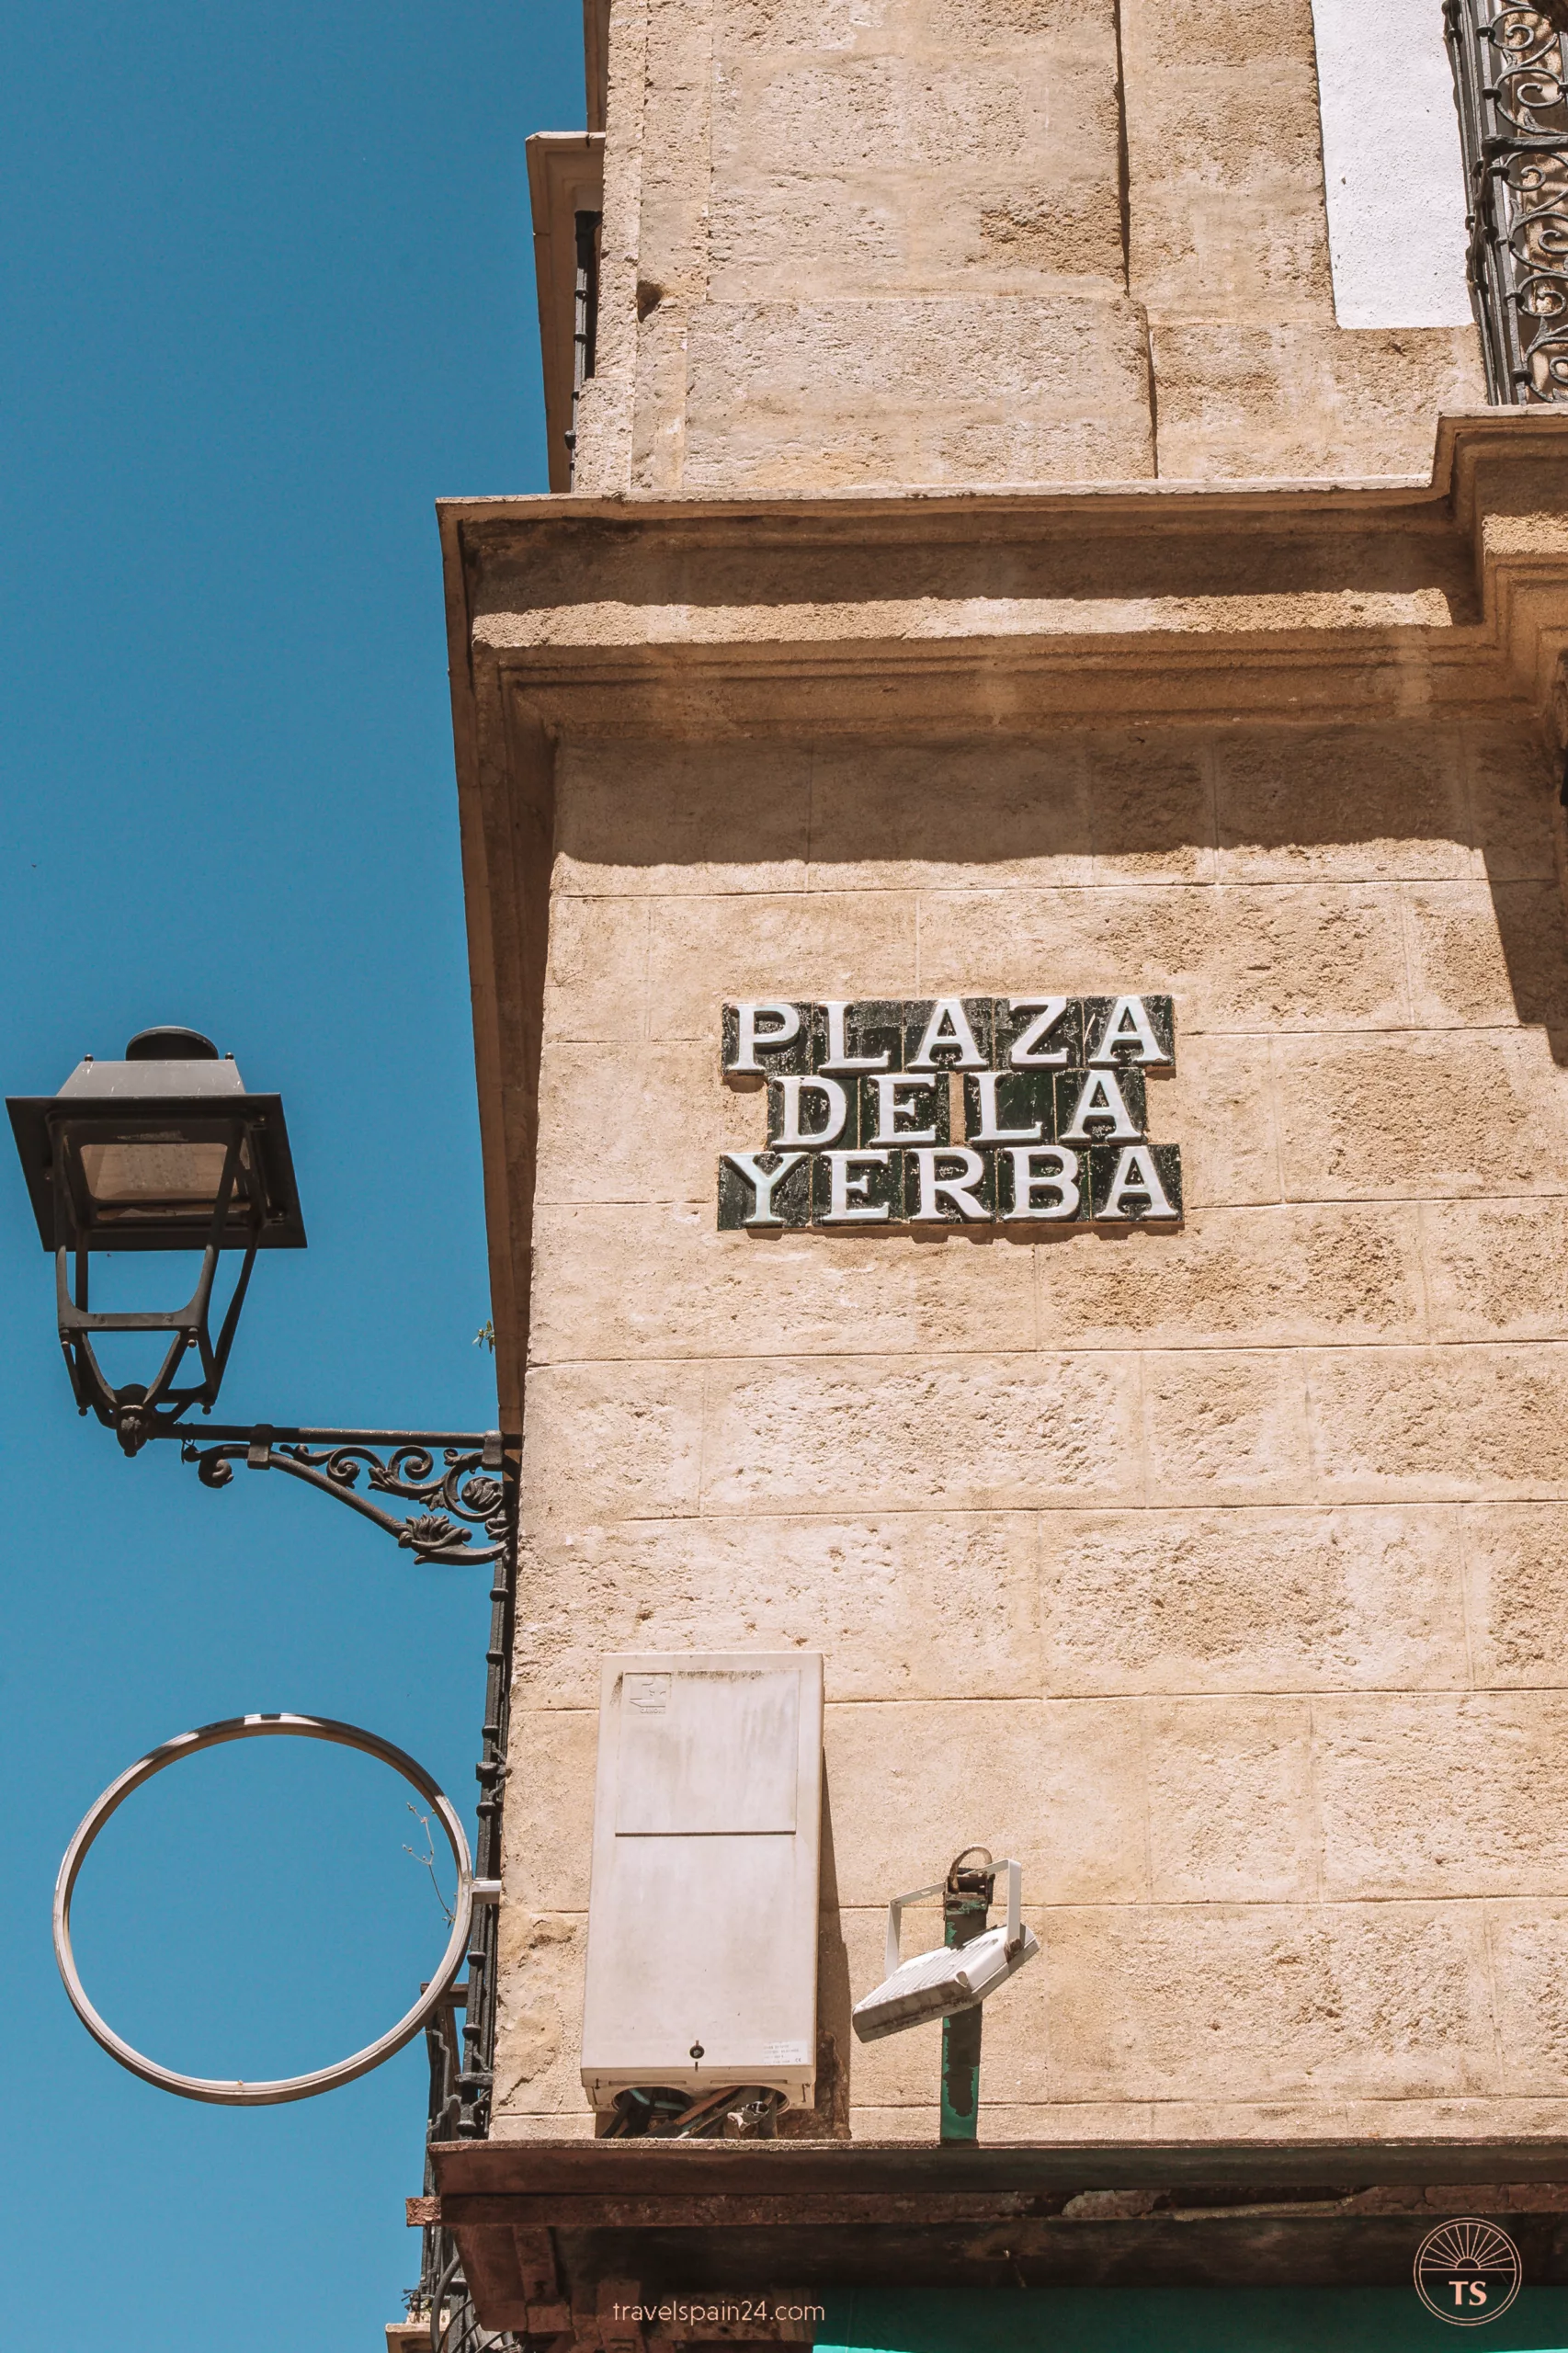 Close-up of the tiles with the name of a plaza in Jerez de la Frontera, emphasizing the traditional Spanish ceramic artistry. This image relates to the post by showcasing the cultural details of Jerez de la Frontera.